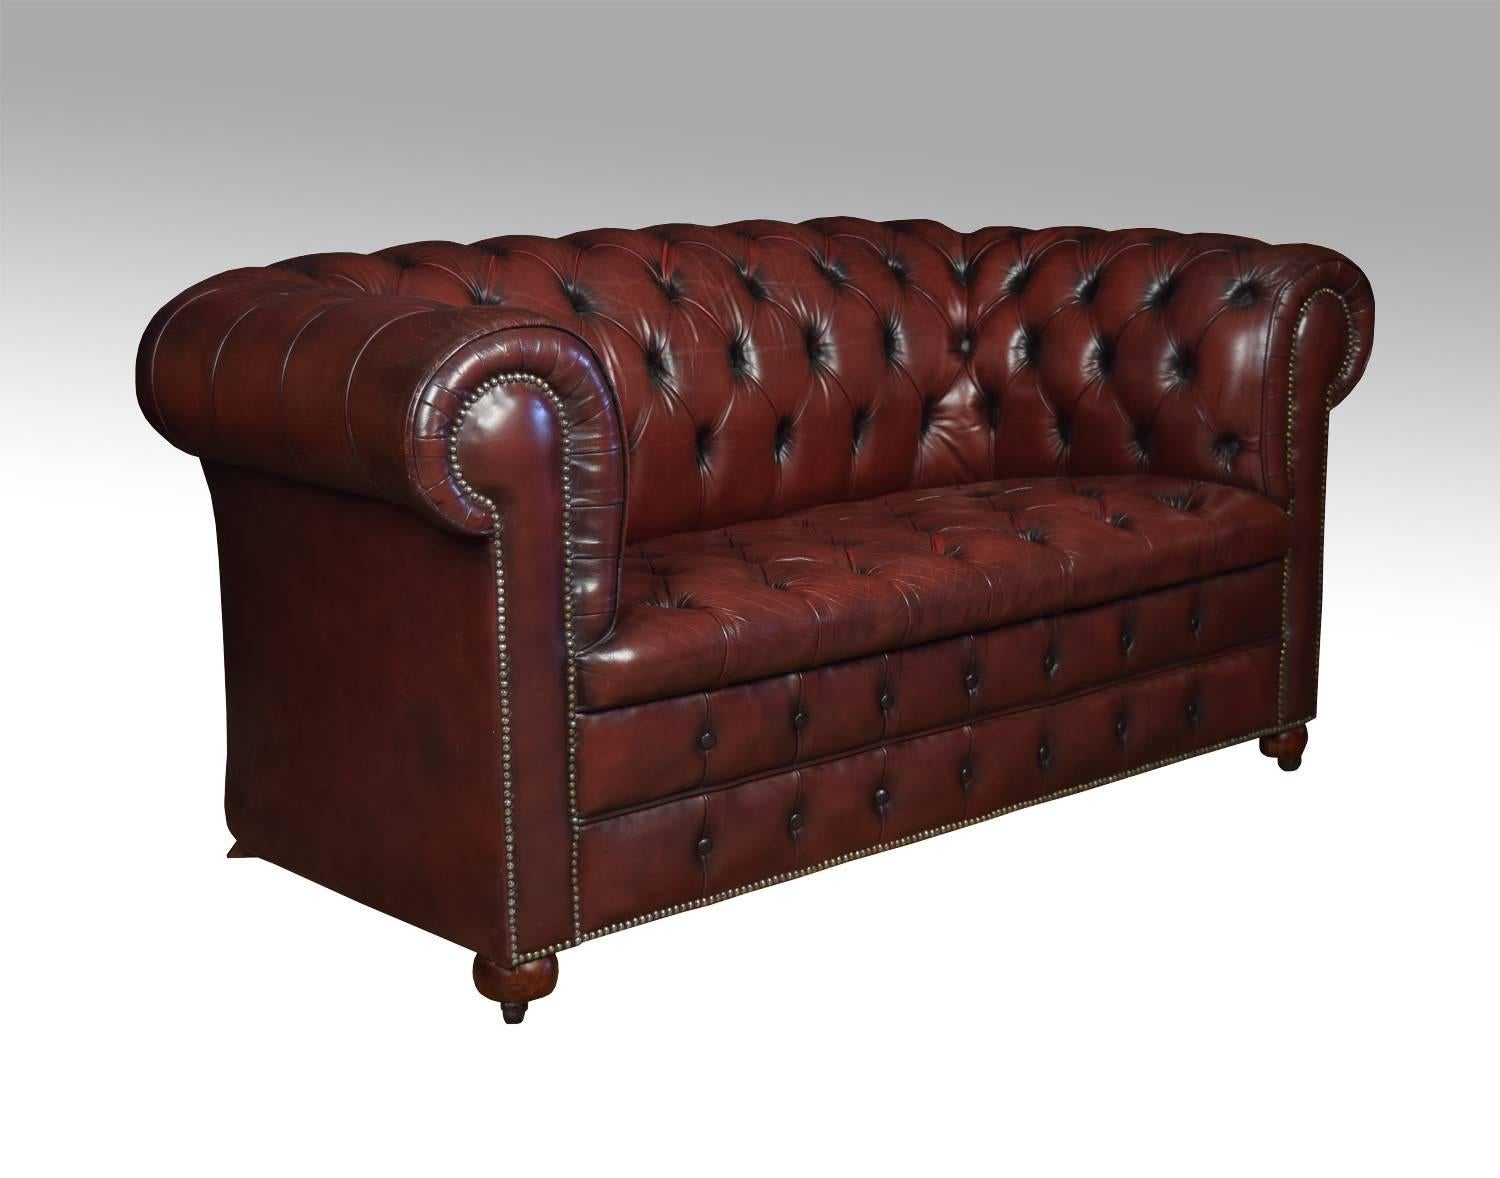 Burgundy two-seat vintage leather Chesterfield sofa on turned front legs with brass ceramic castors, with shaped feet to the back. Good solid condition, the leather is soft, nicely worn in with no rips or tears.
Dimensions
Height 30 inches, height